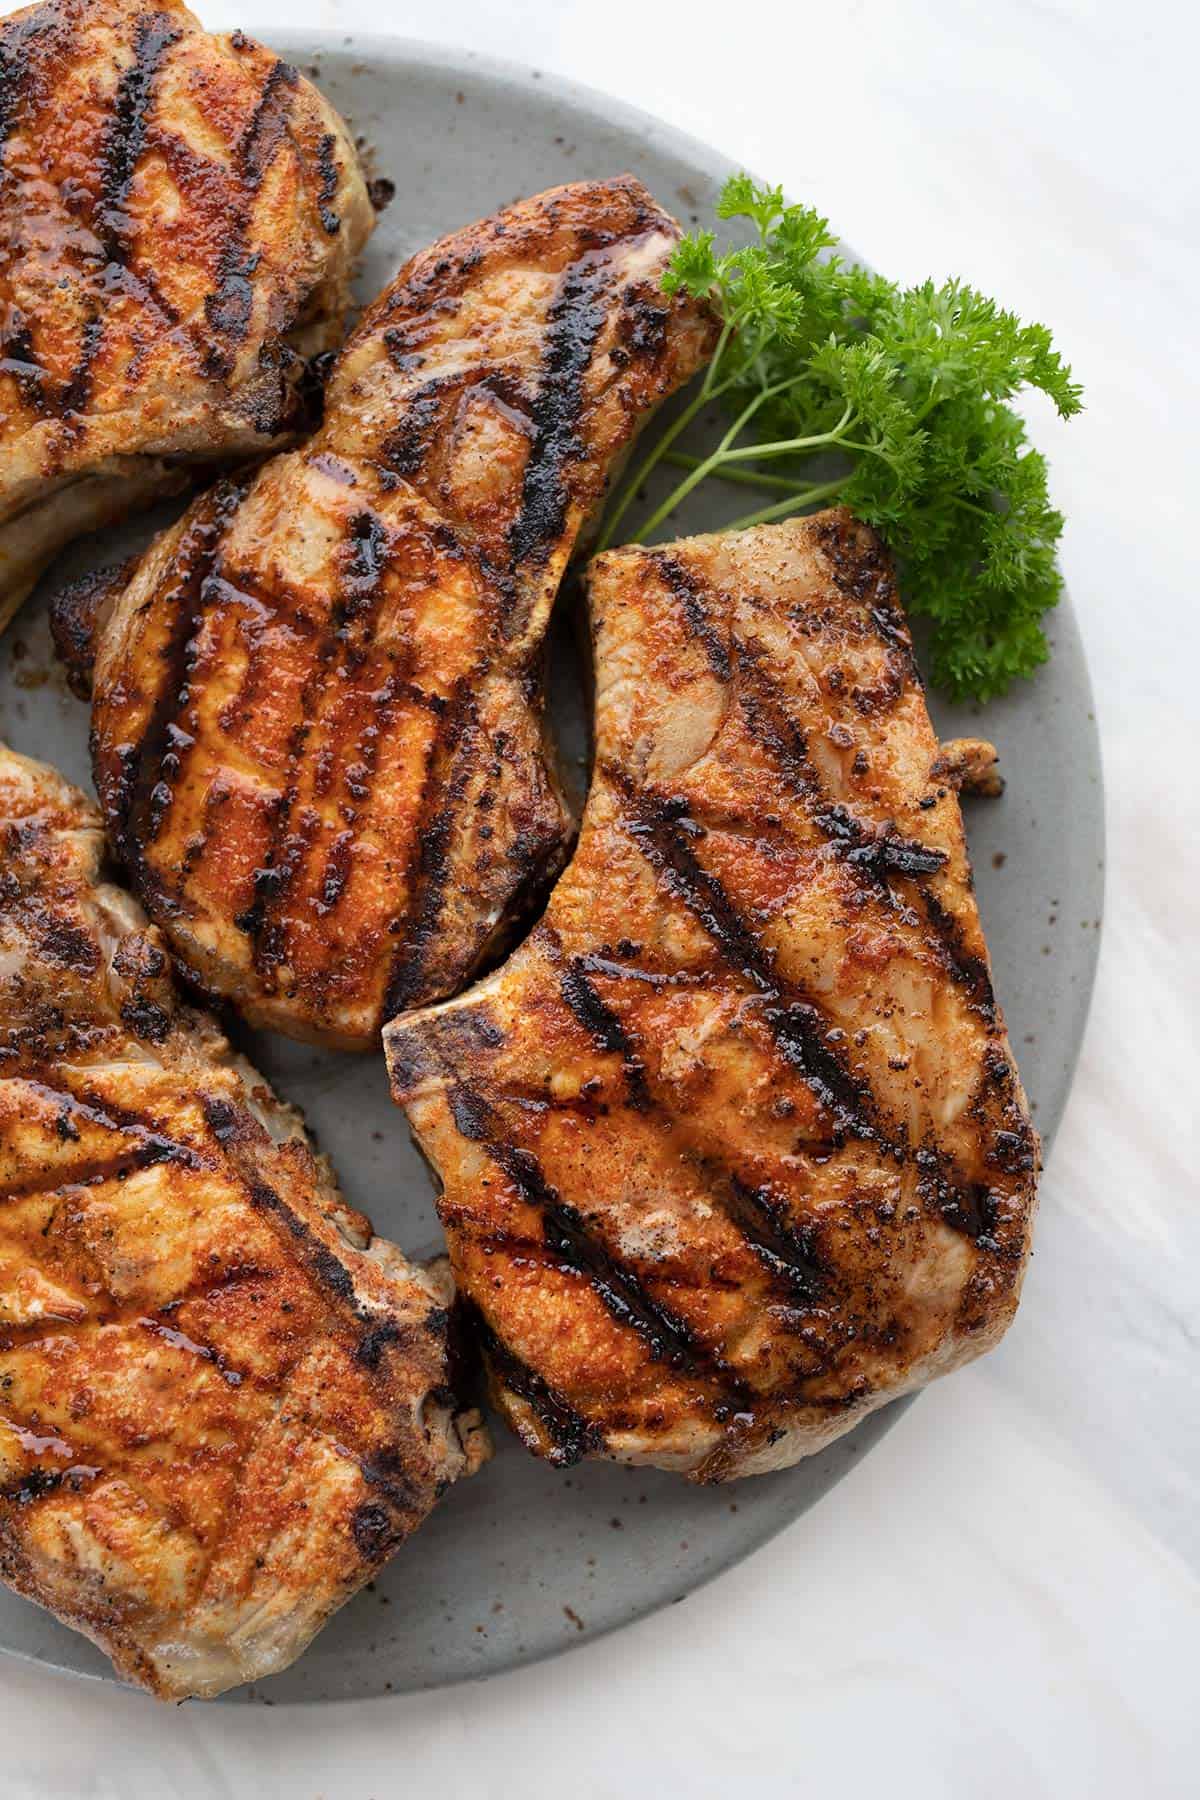 Top down image of grilled pork chops on a gray plate over a marble table. 